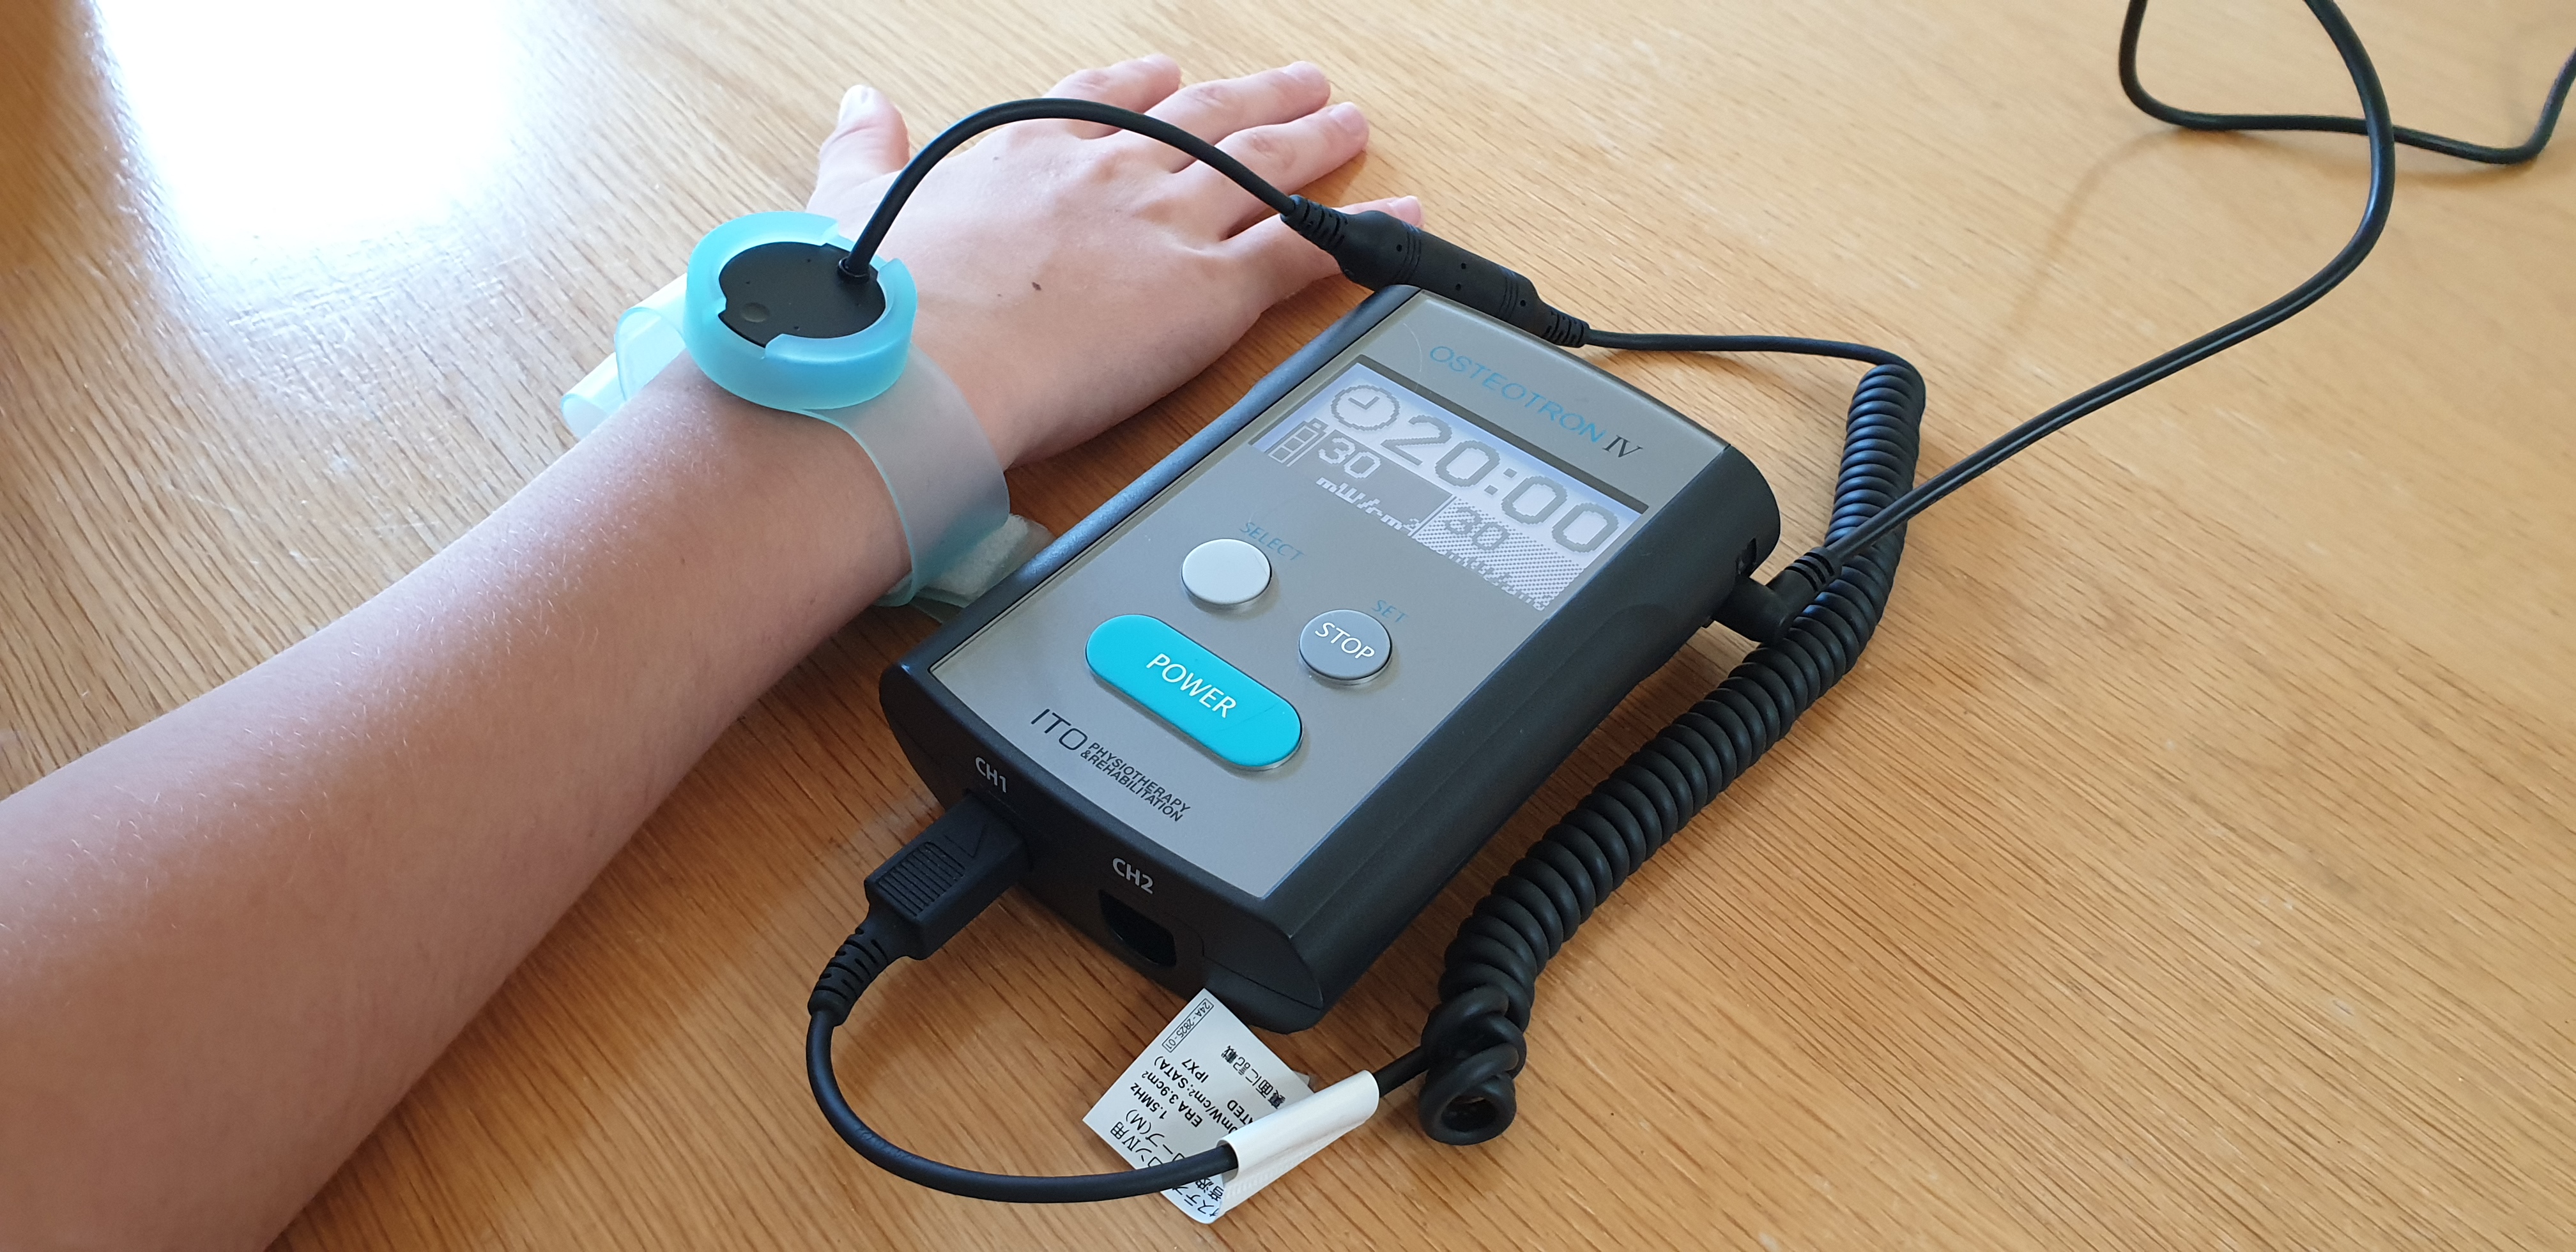 Low intensity pulsed ultrasound machine strapped to a patients wrist